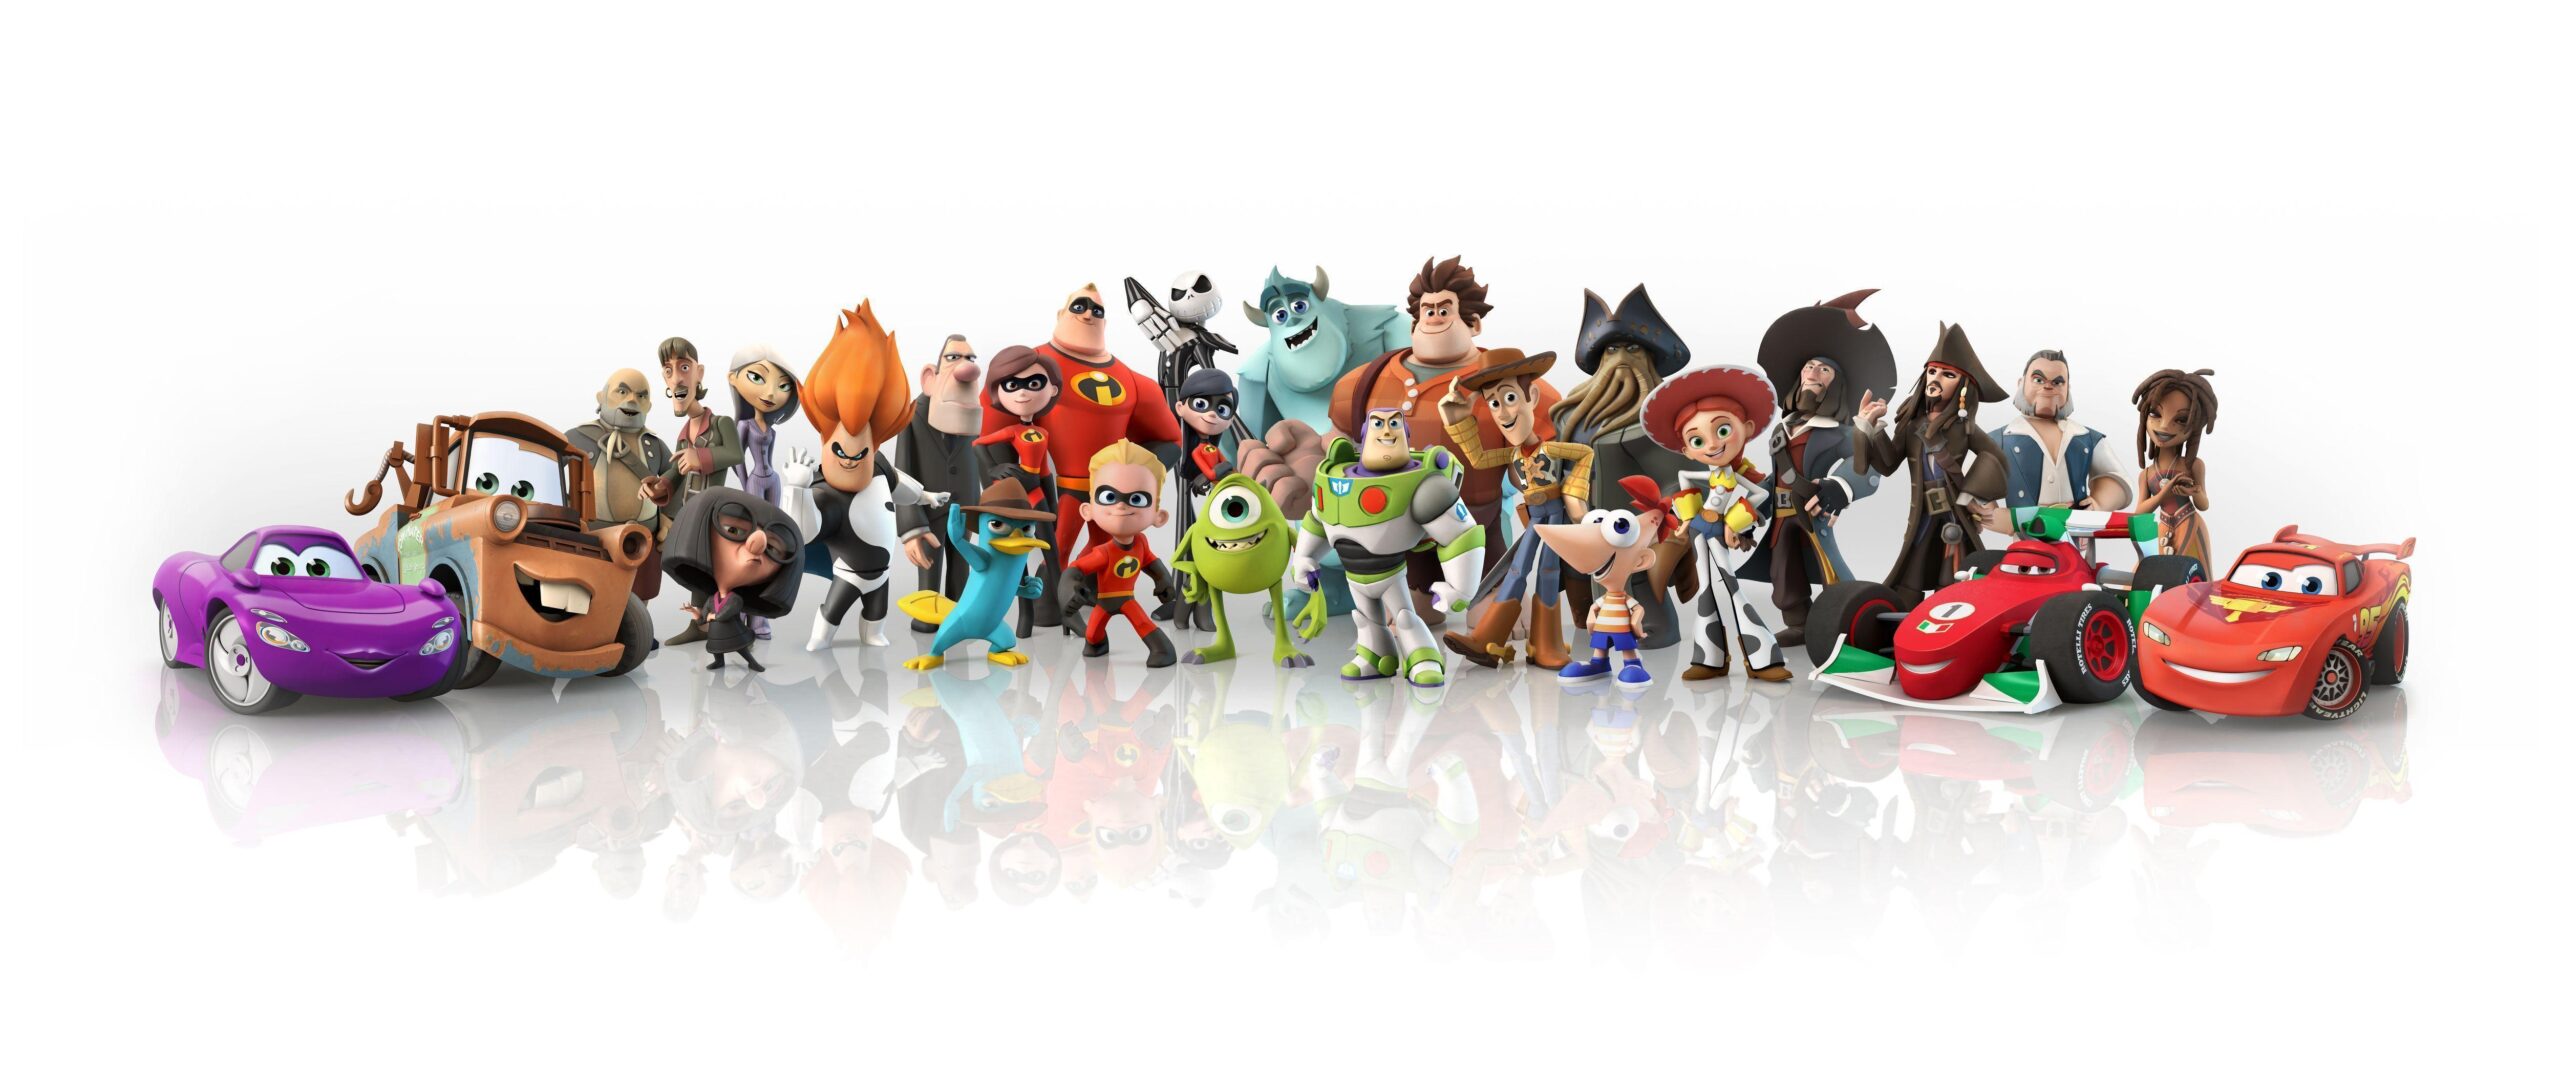 Animation Outsourcing Companies for 3D animation movies